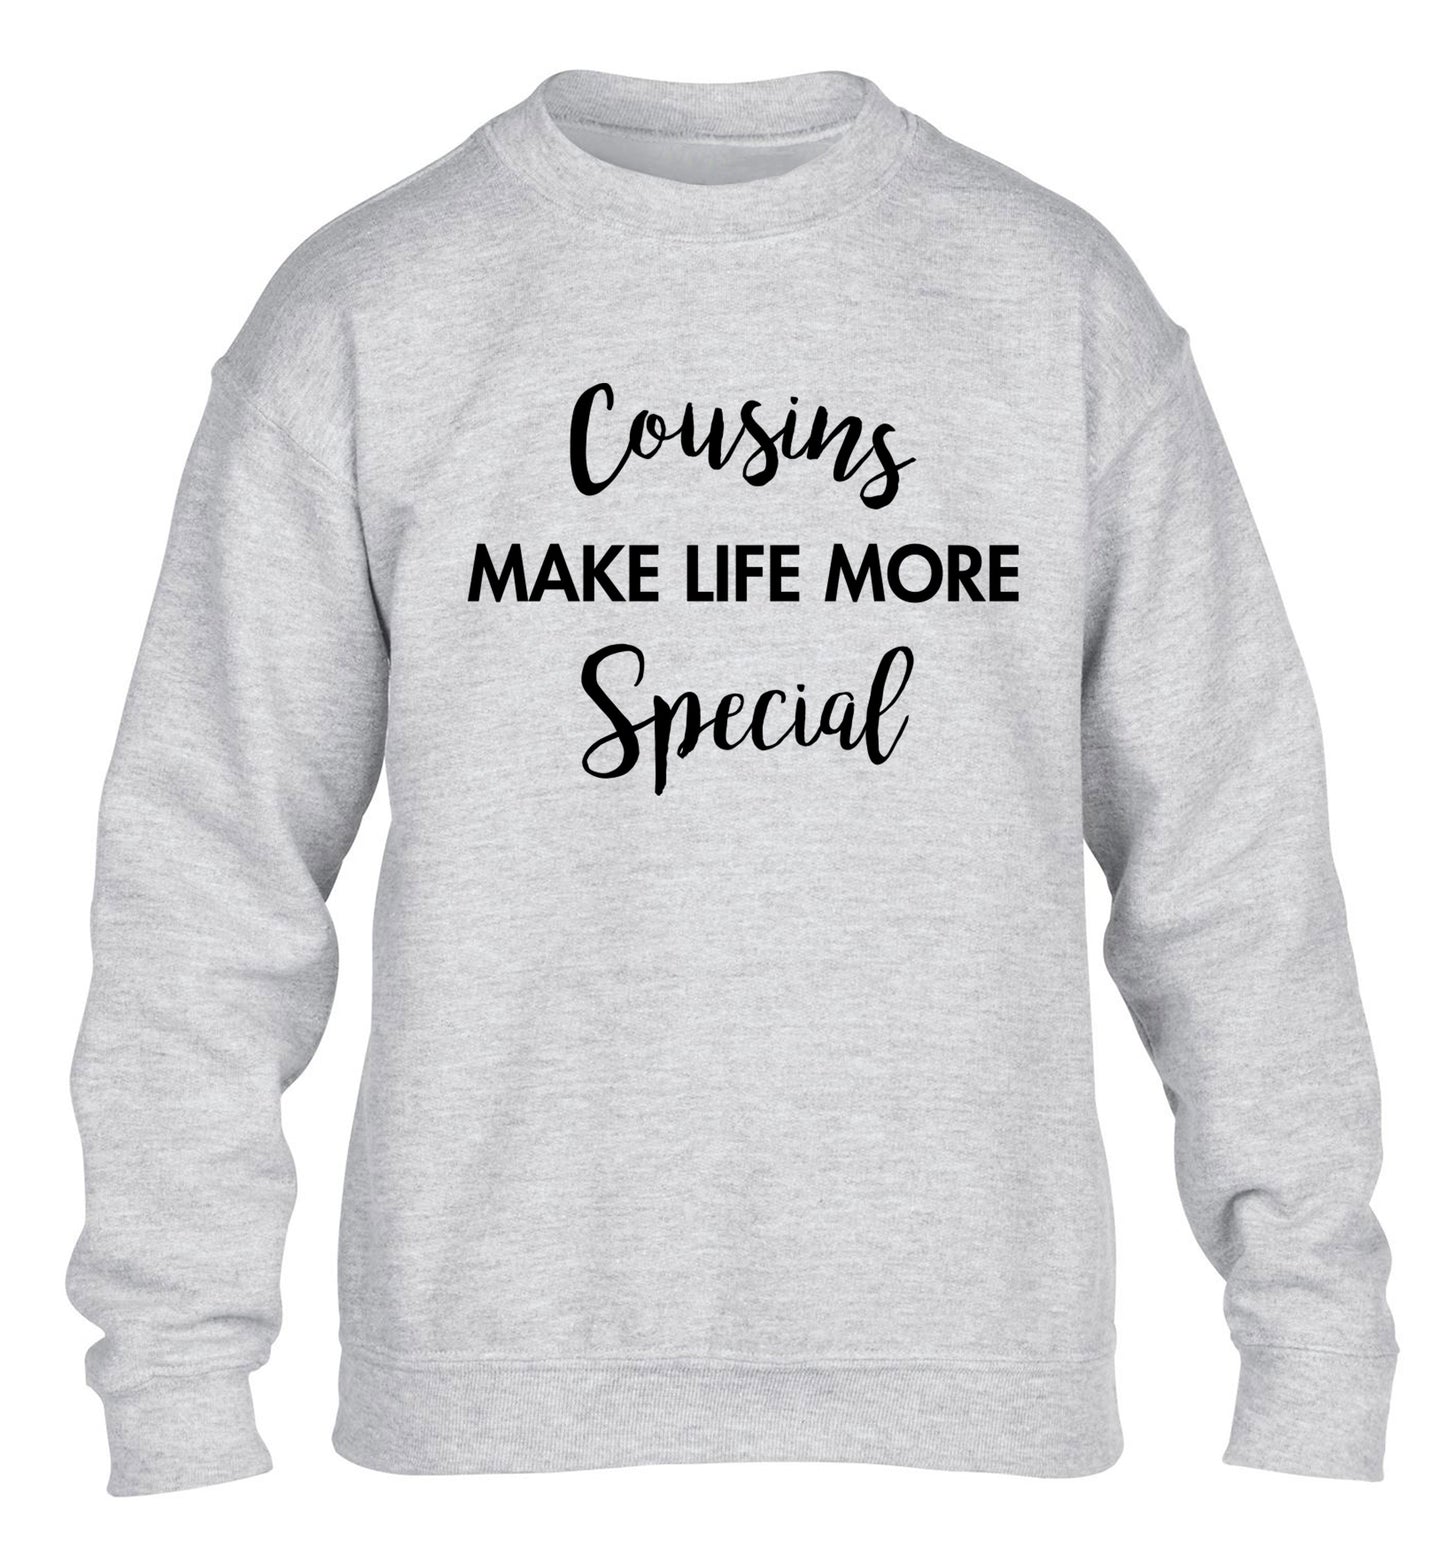 Cousins make life more special children's grey sweater 12-14 Years